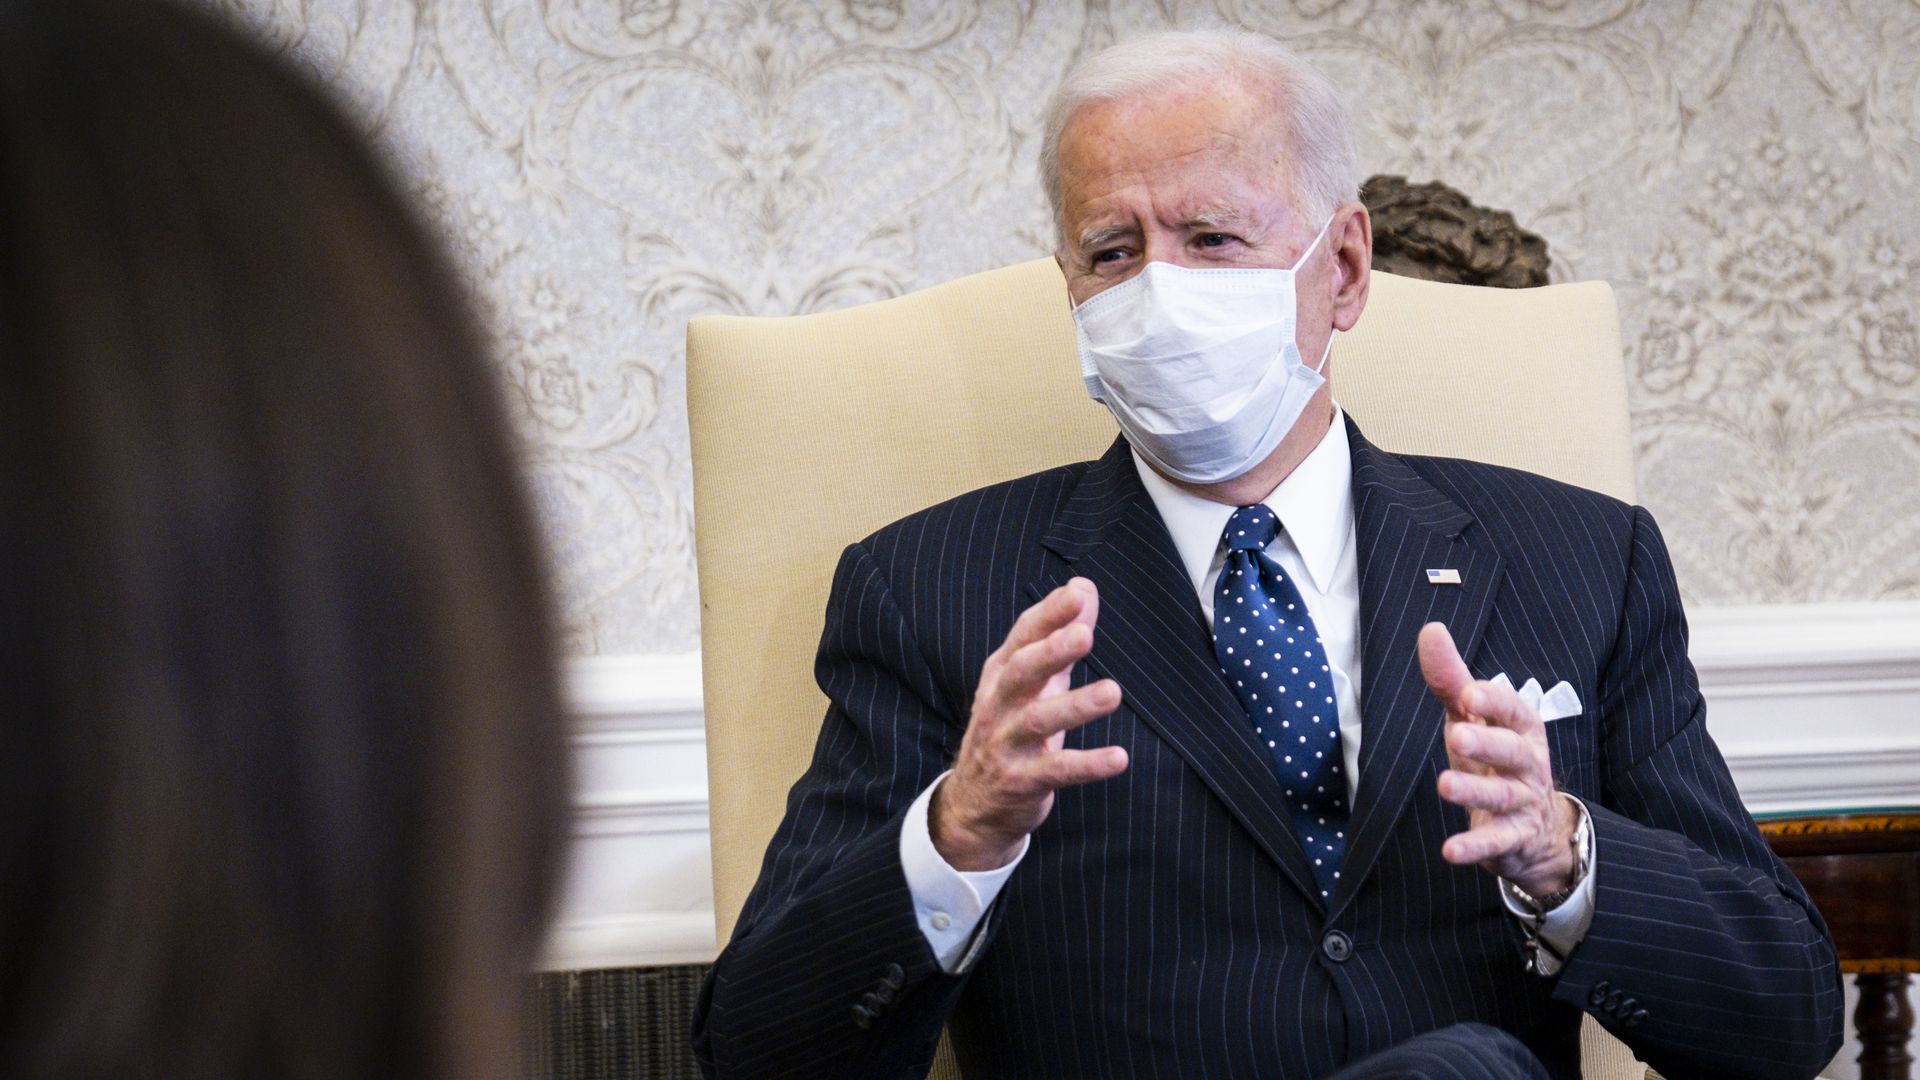 Photo of a masked Joe Biden speaking while gesturing with his hands